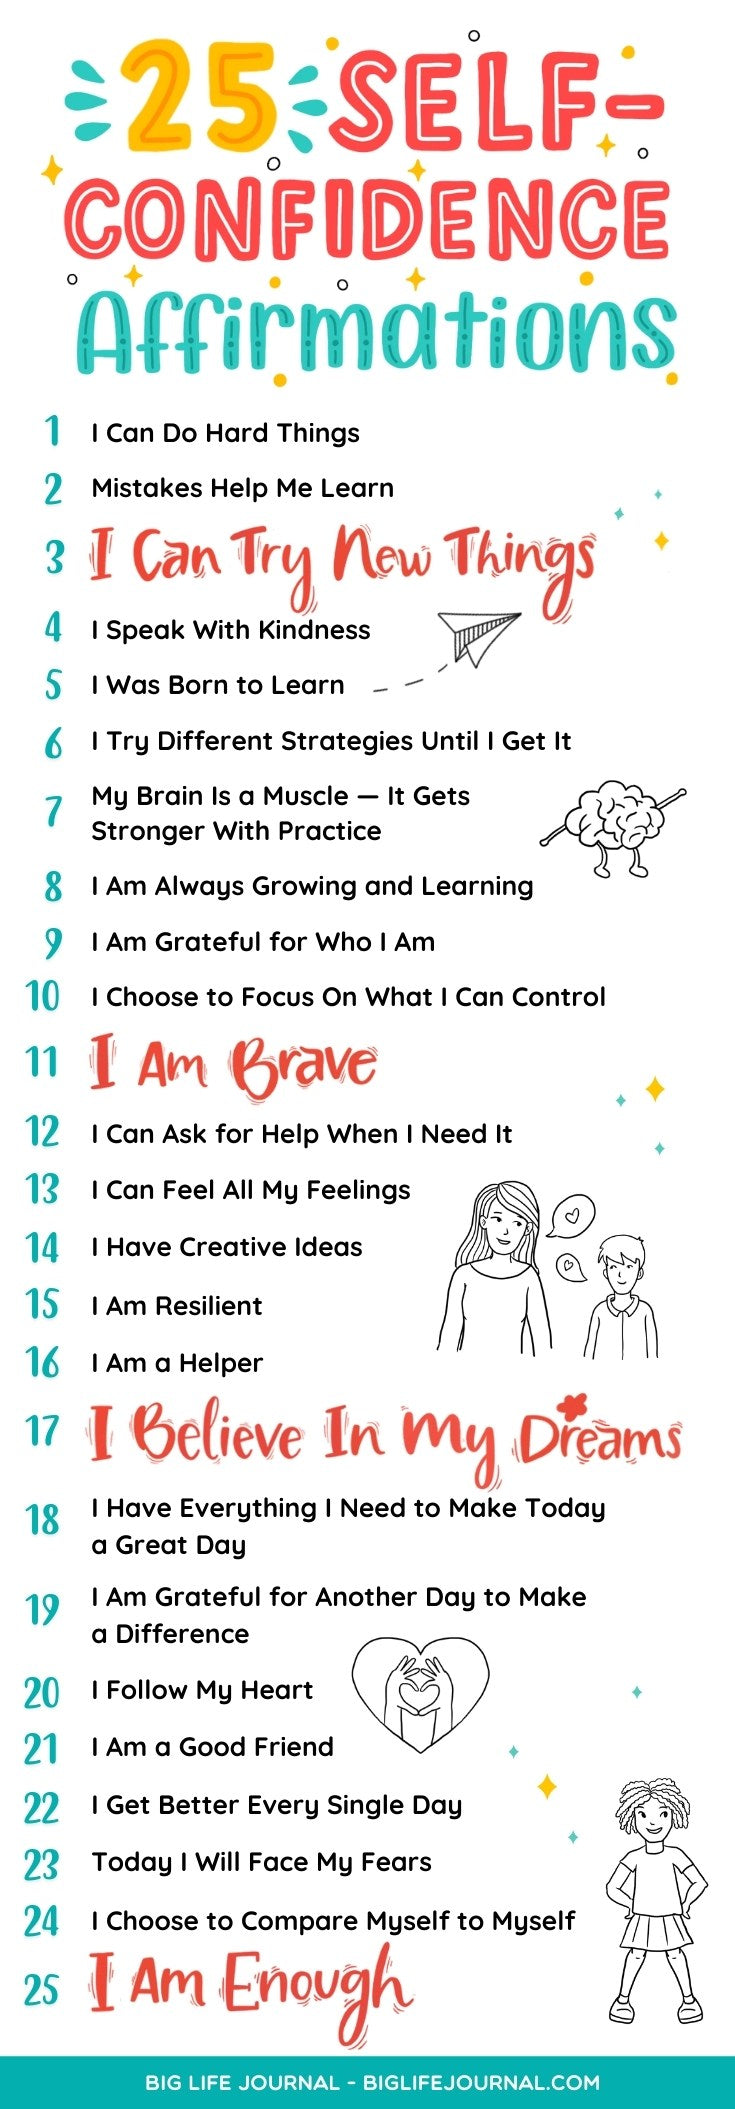 25 Self- Confidence Affirmations